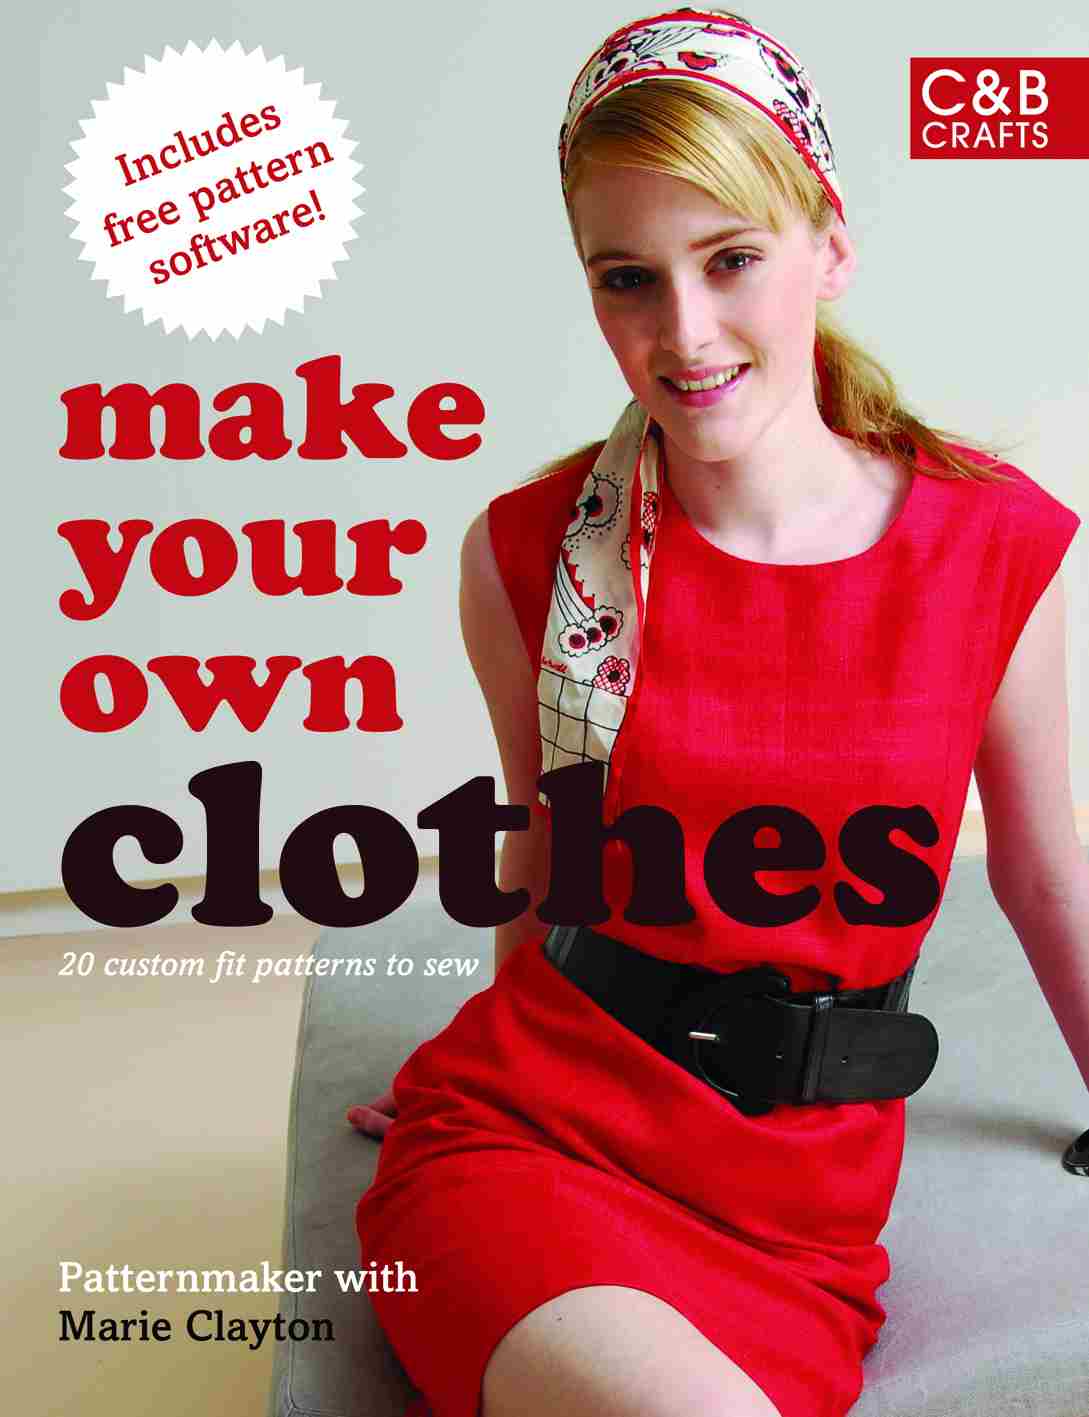 Using Sewing Patterns You Can Be Your Own Mini Designer, How?